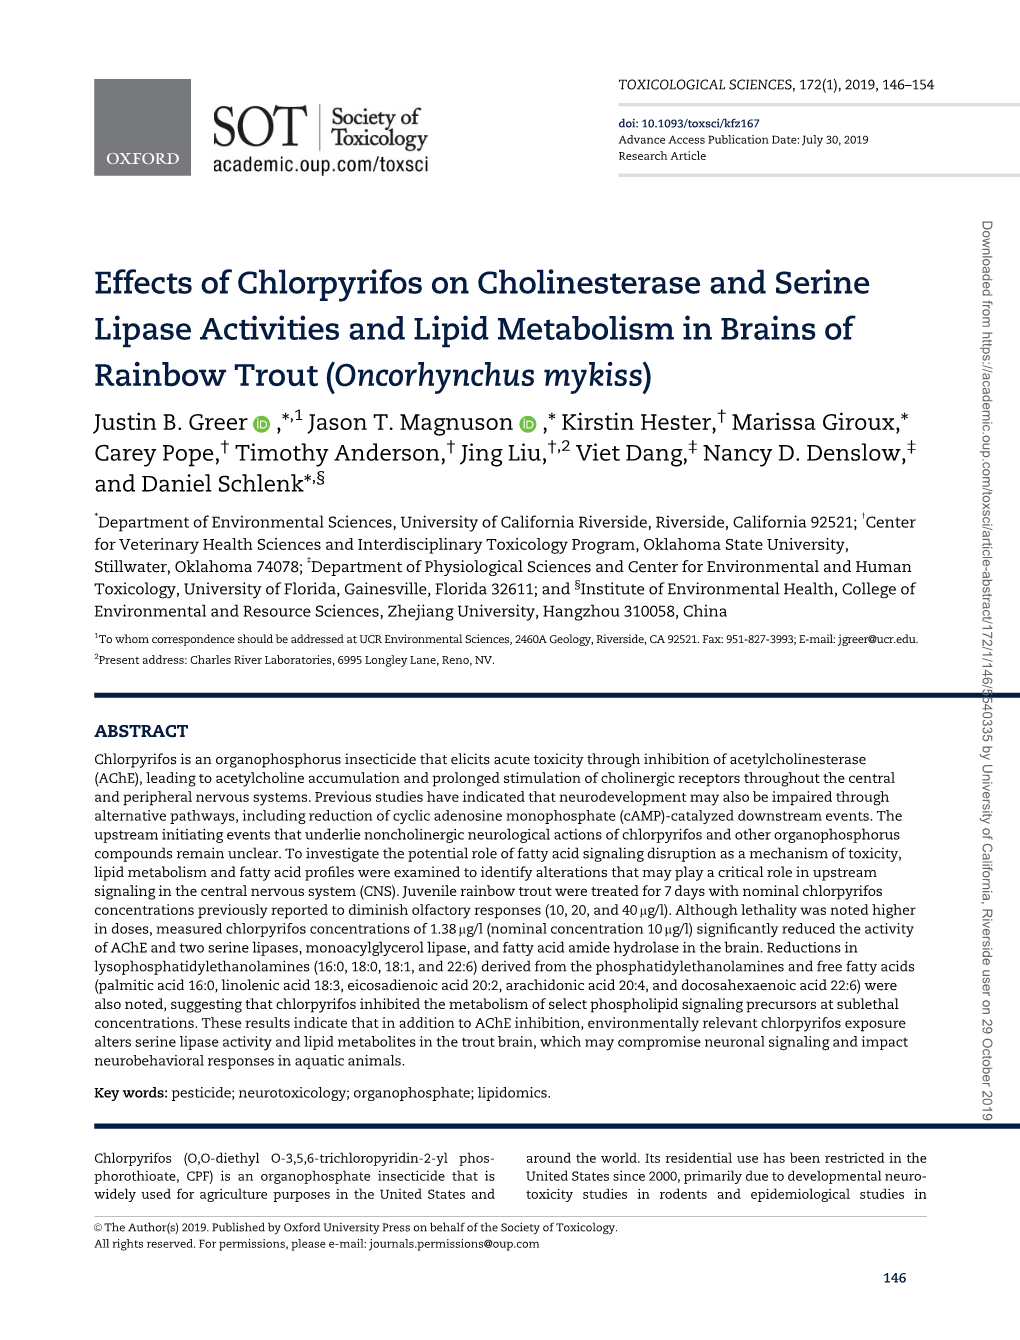 Effects of Chlorpyrifos on Cholinesterase and Serine Lipase Activities and Lipid Metabolism in Brains of Rainbow Trout (Oncorhynchus Mykiss) Justin B